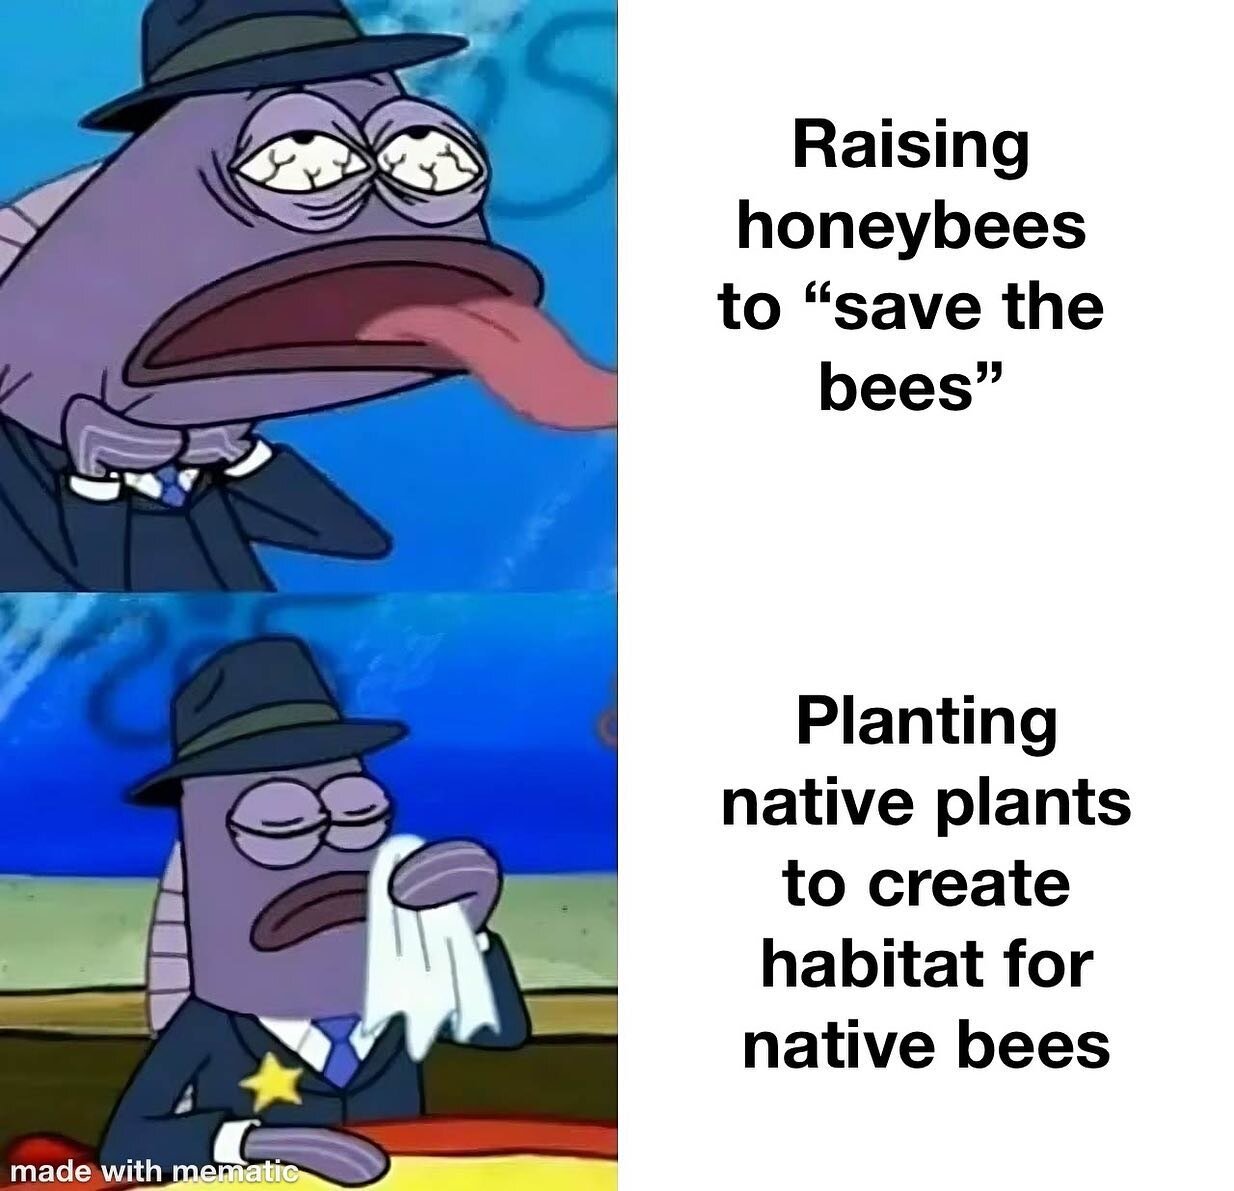 A reminder on #worldbeeday. Honeybees aren&rsquo;t a natural part of the ecology in North America. So, raising honeybees to save the bees is like raising chickens to save the birds. Instead, we need to preserve existing native habitat for pollinators